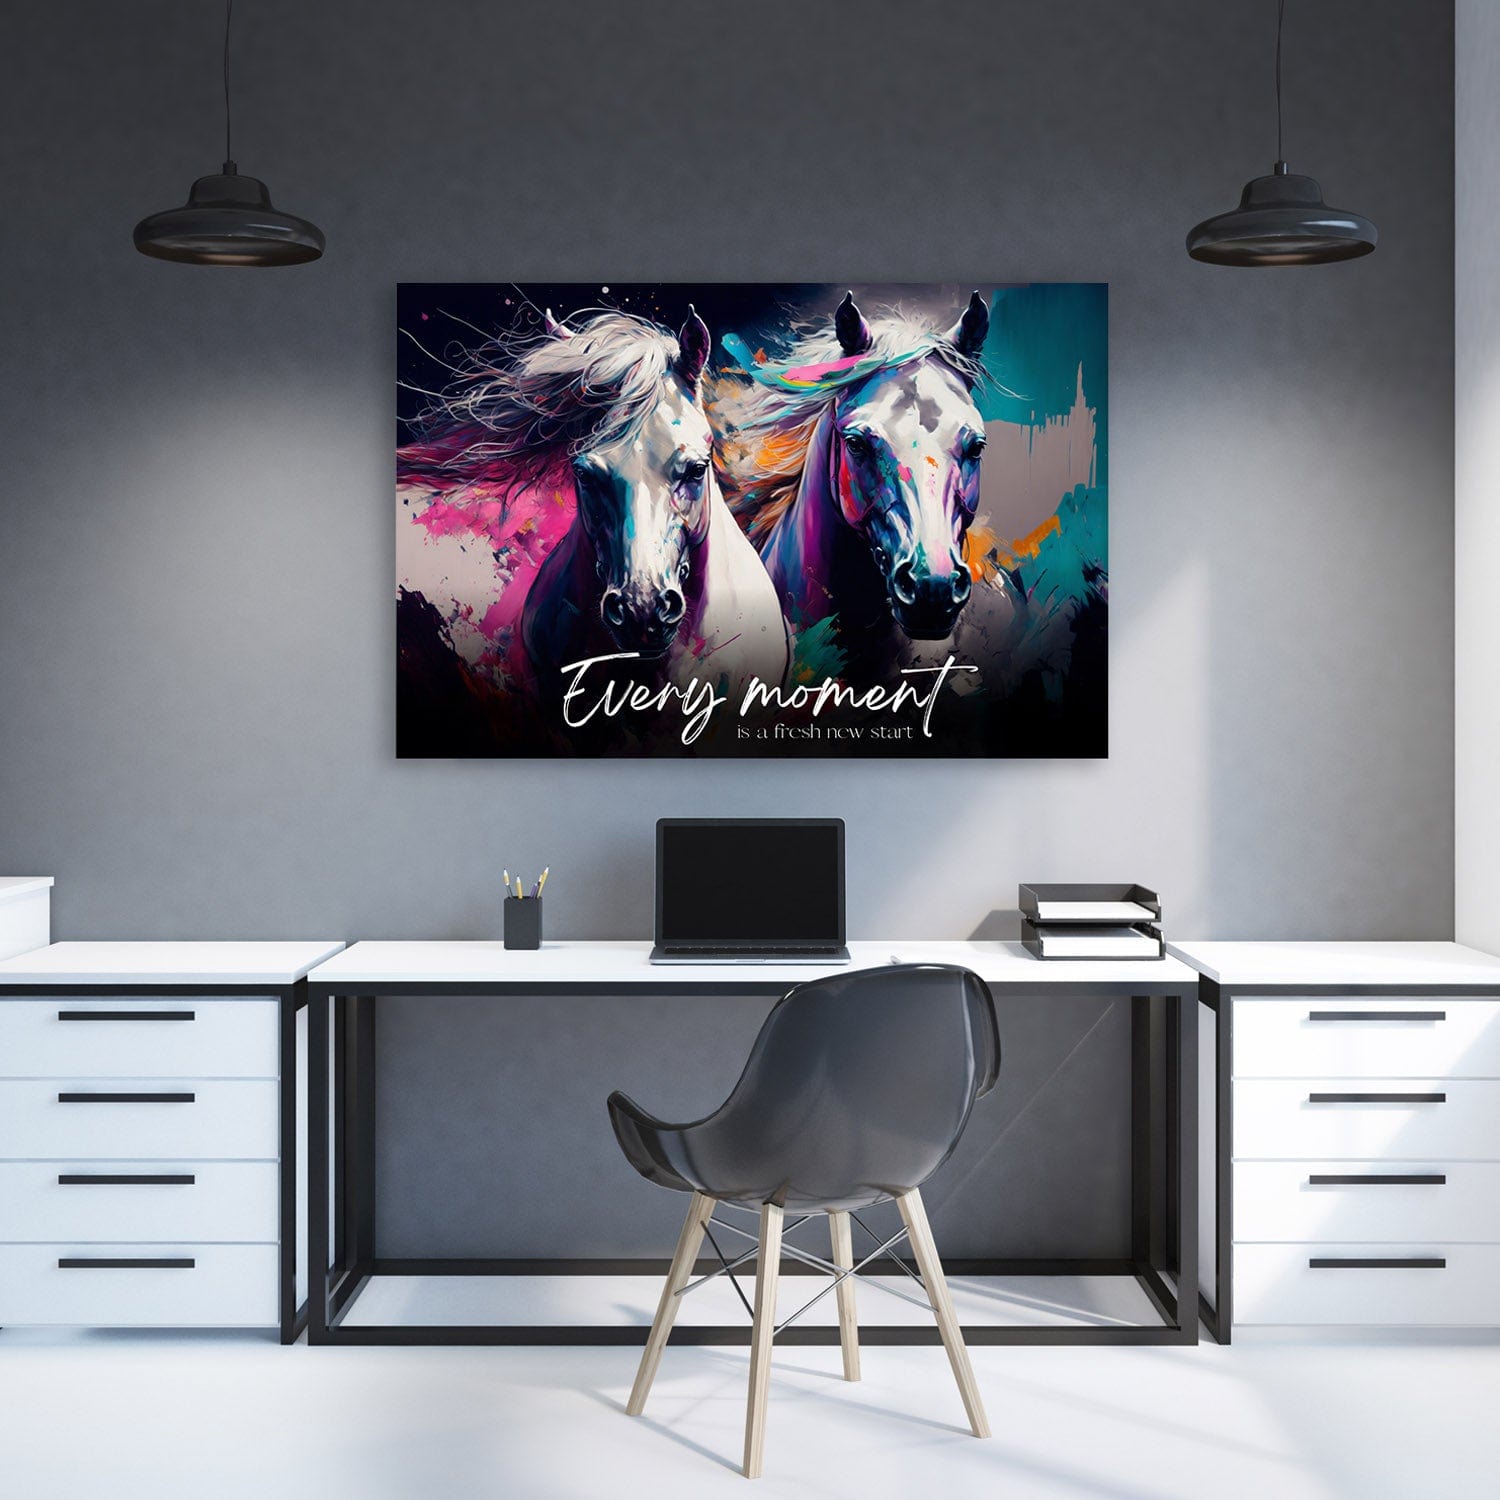 Abstract Horses Painting - Every moment is a fresh new start quote Wall Art | Inspirational Wall Art Motivational Wall Art Quotes Office Art | ImpaktMaker Exclusive Canvas Art Landscape